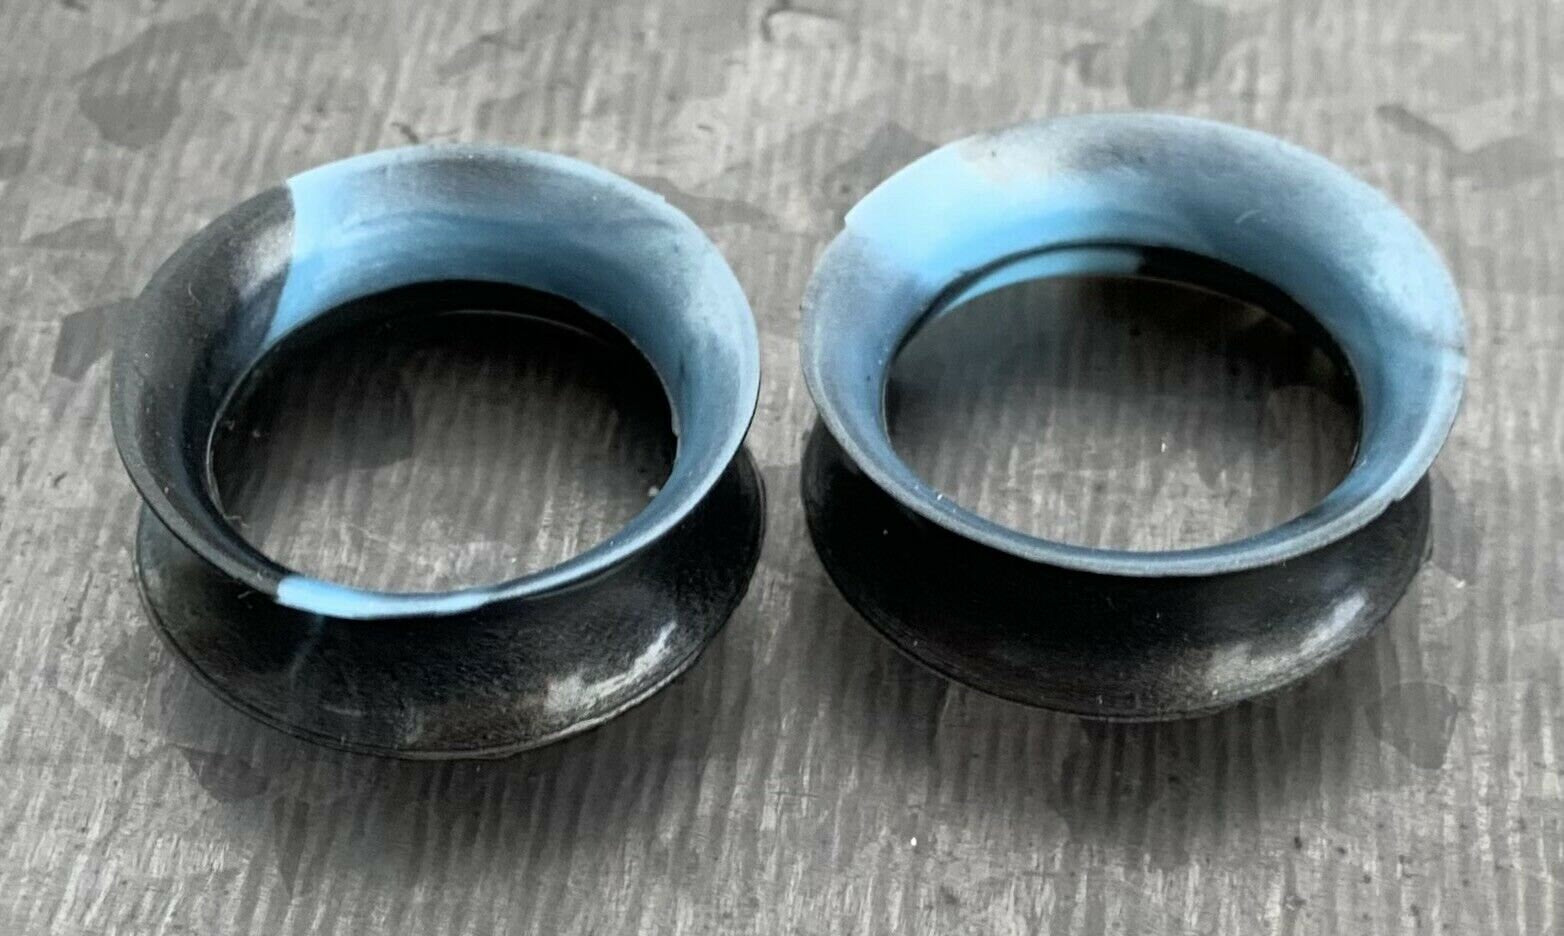 PAIR Beautiful Black & Aqua Swirl Ultra Thin Silicone Double Flare Tunnels/Plugs - Gauges 4g (5mm) thru 7/8" (22mm) available!